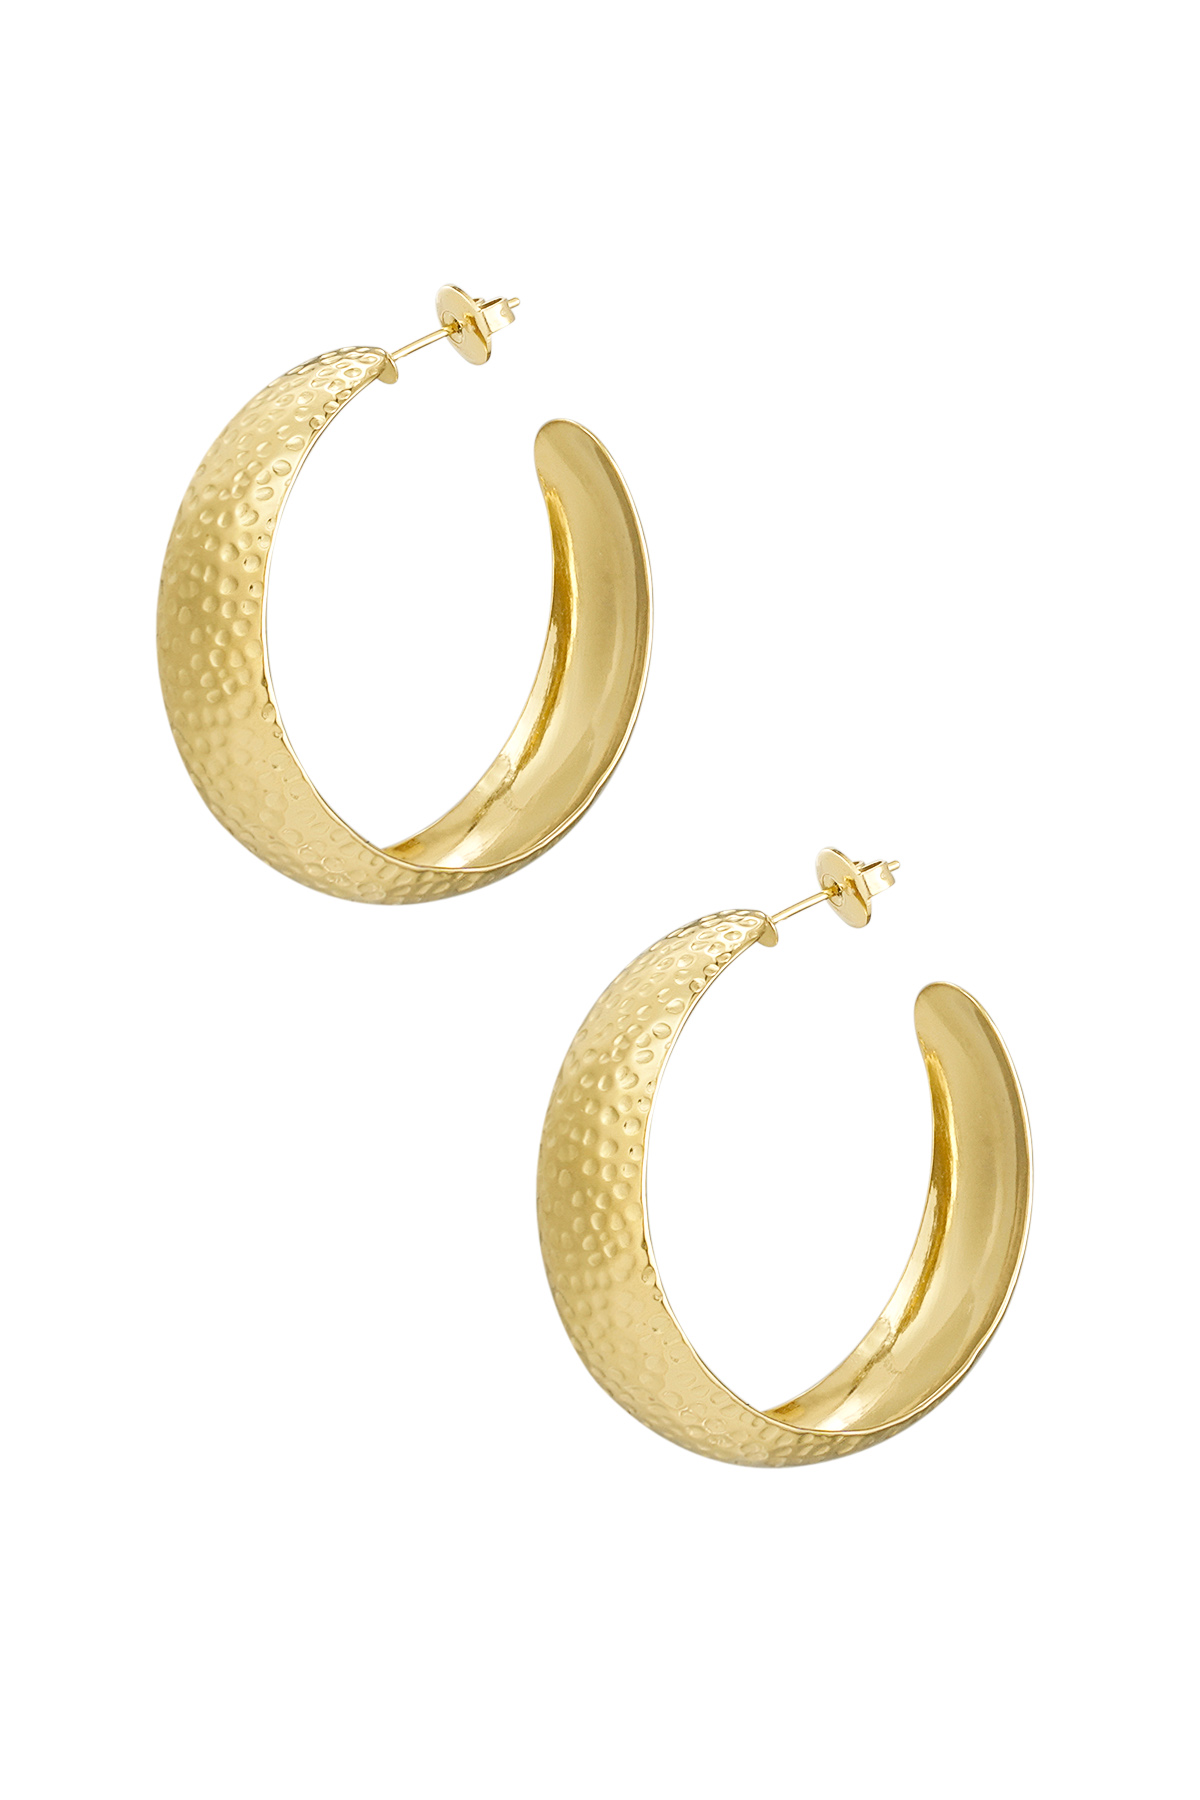 Earrings bubbly structure - gold